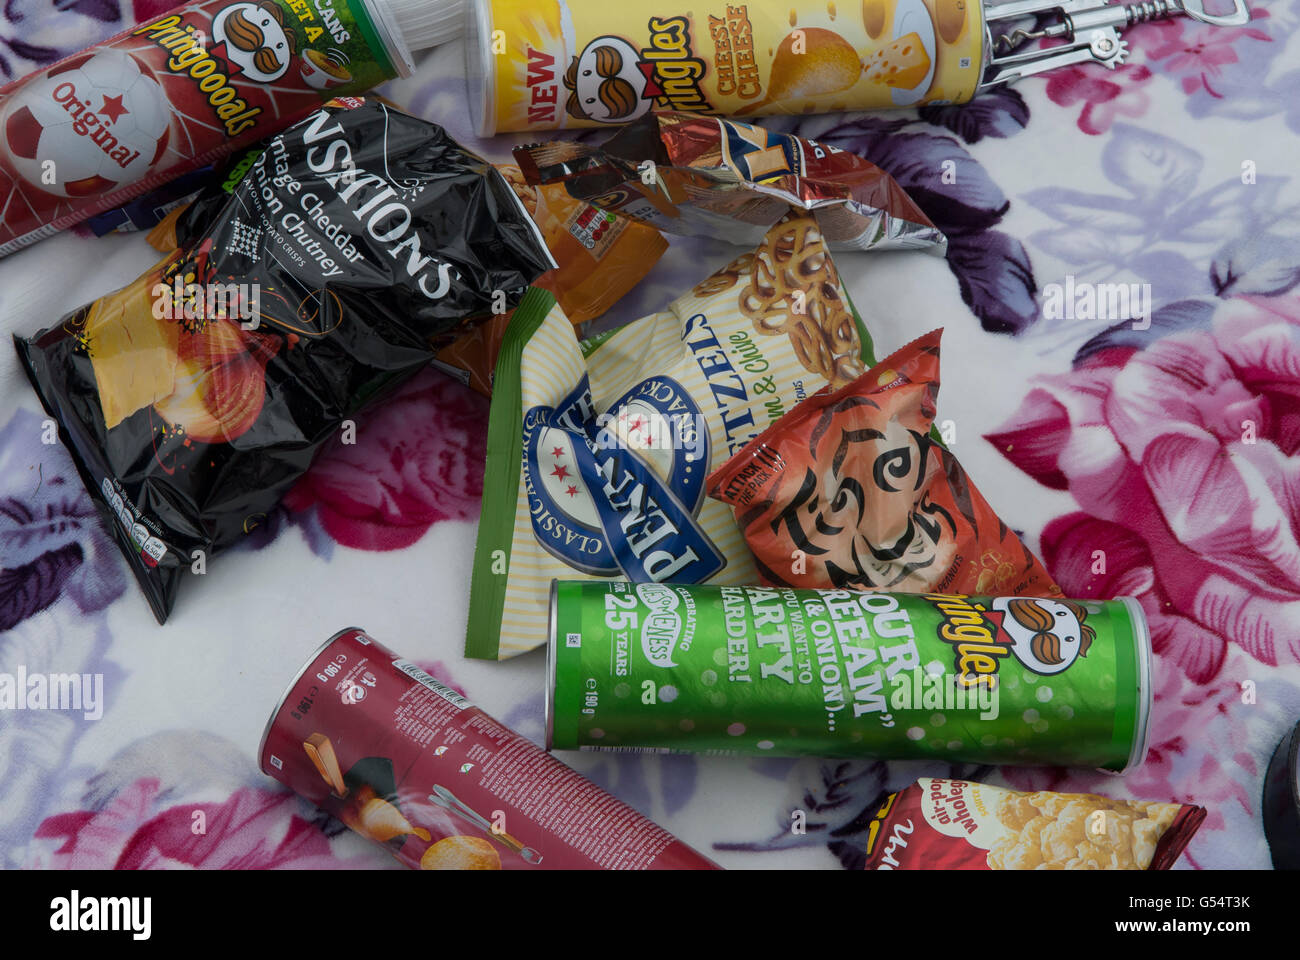 Single use plastic food wrapping  UK. Picnic, shop bought food plastic wrappers spread out on picnic blanket England HOMER SYKES Stock Photo